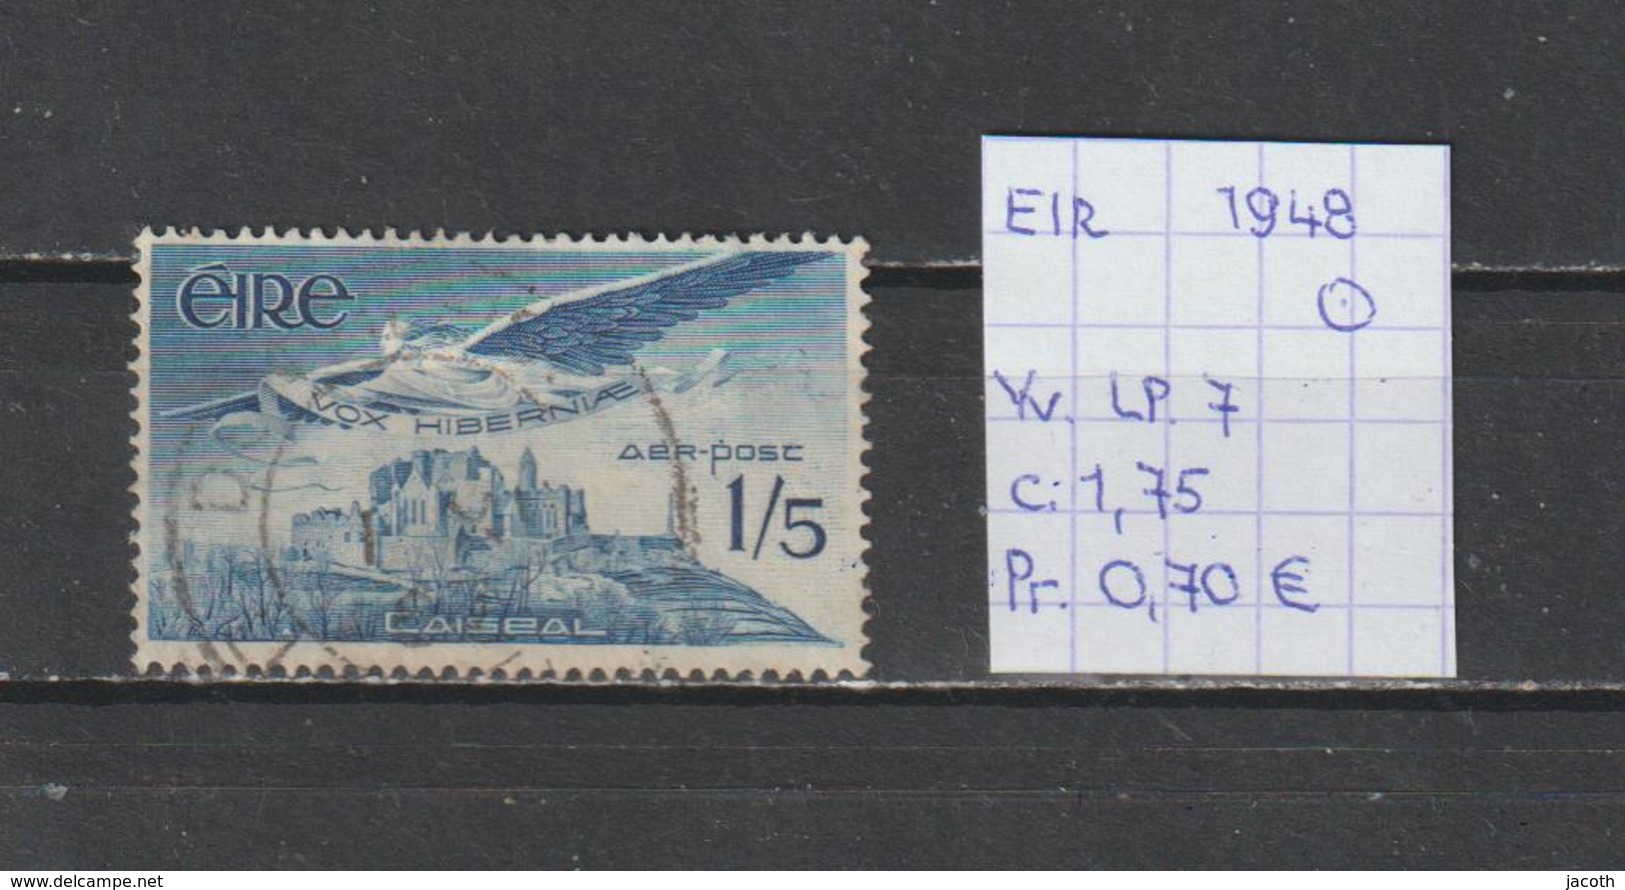 Eire 1948 - Yv. LP. 7 Gest./obl./used - Airmail